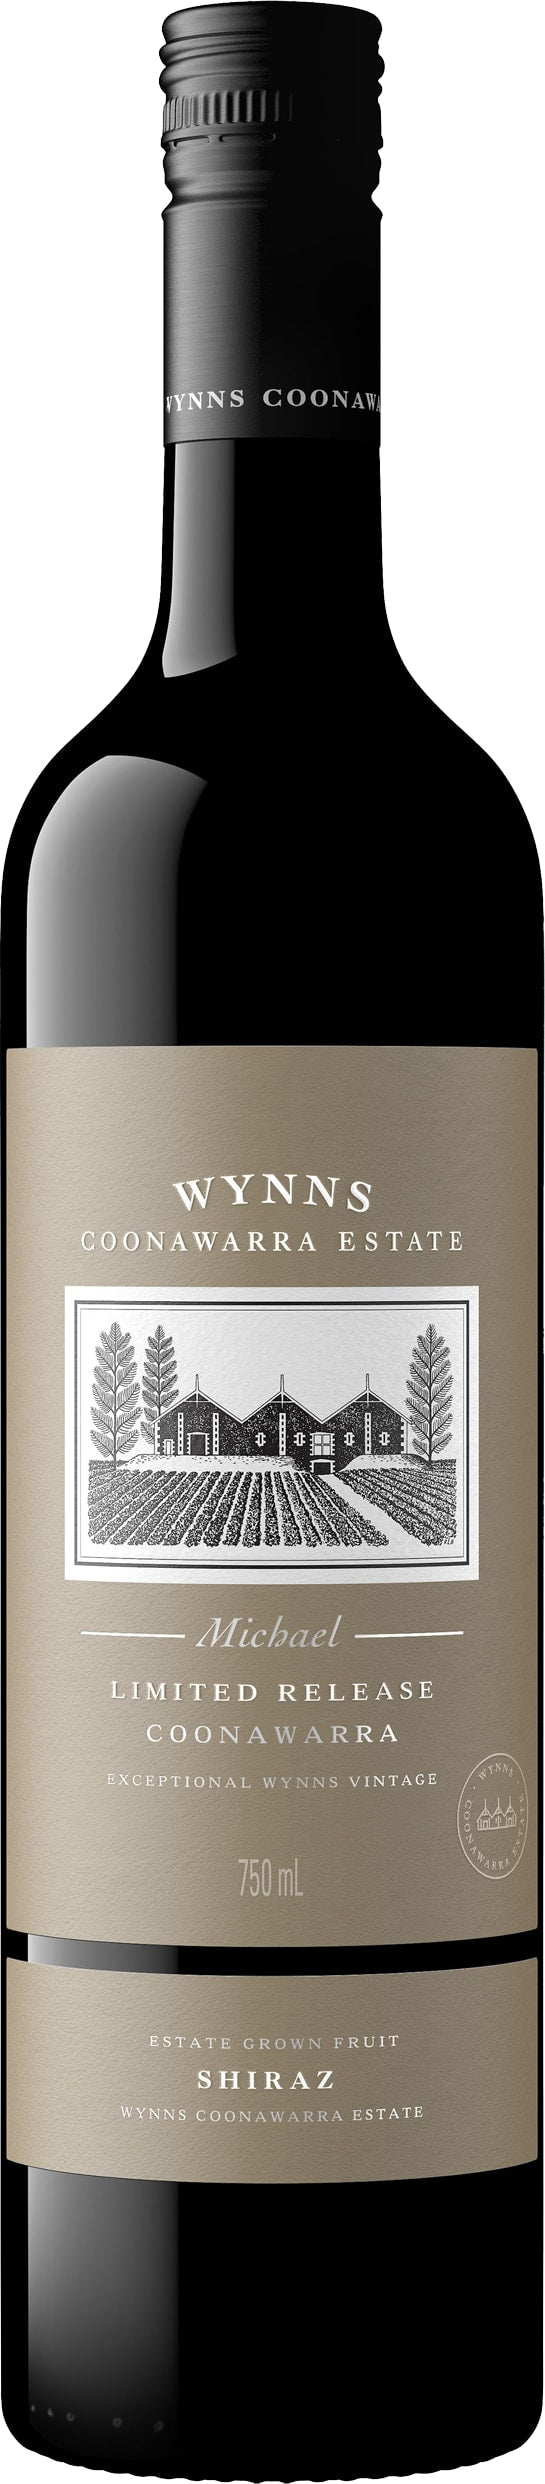 Wynns Michael Limited Release Shiraz 2016 75cl - Buy Wynns Wines from GREAT WINES DIRECT wine shop